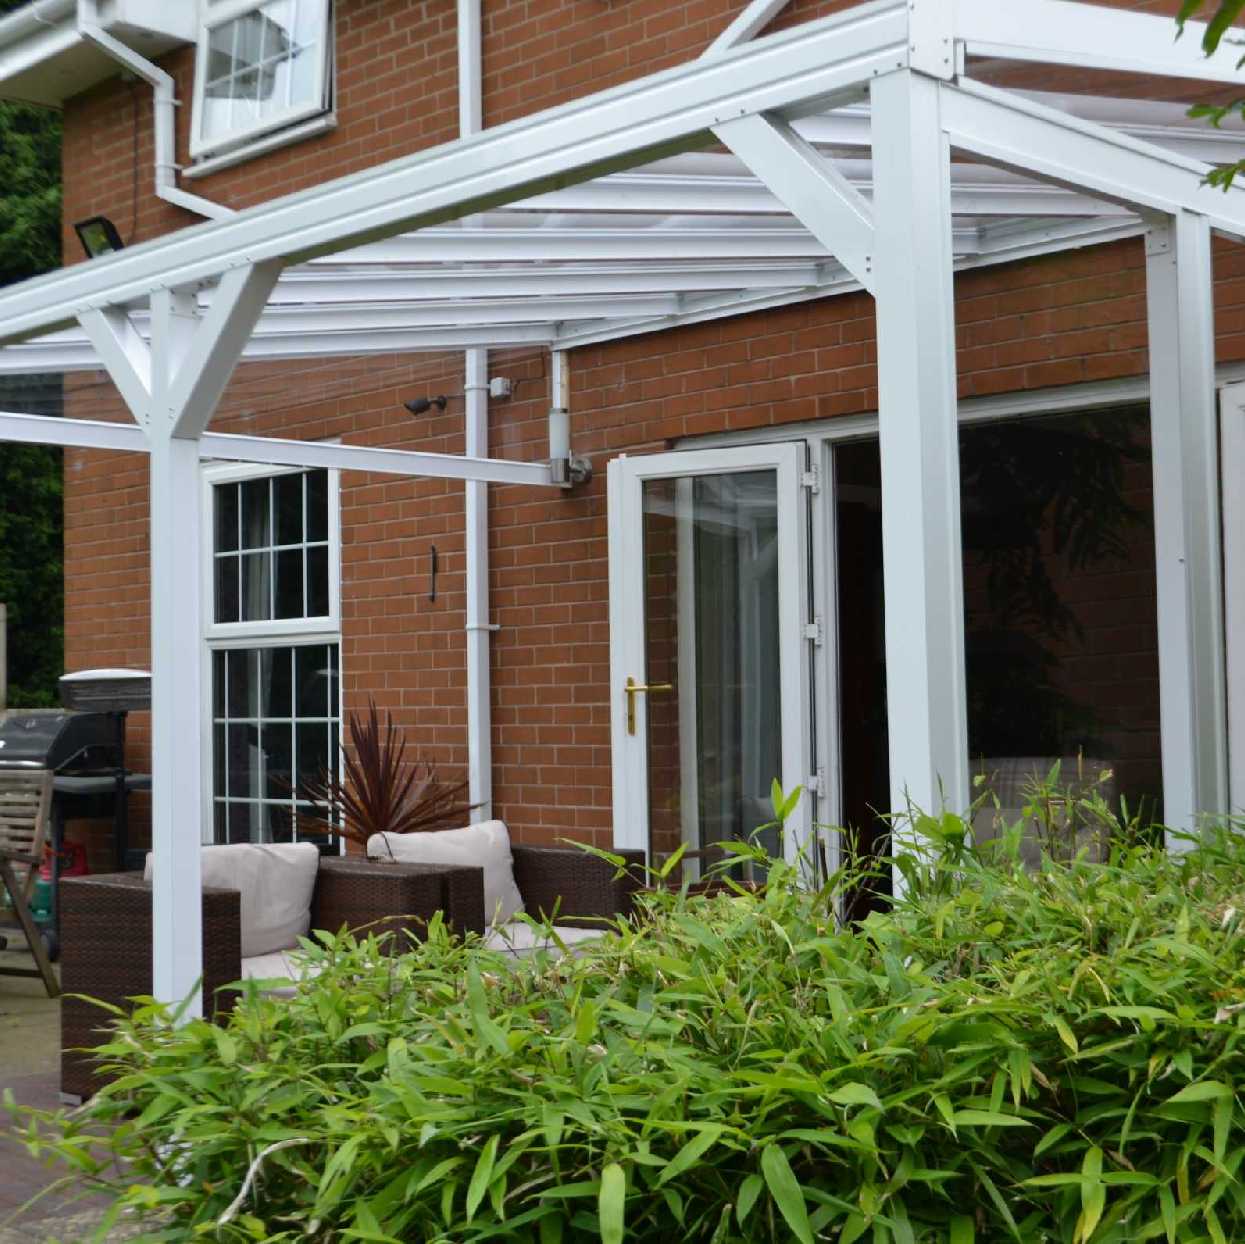 Omega Smart Lean-To Canopy, White UNGLAZED for 6mm Glazing - 4.9m (W) x 1.5m (P), (3) Supporting Posts from Omega Build